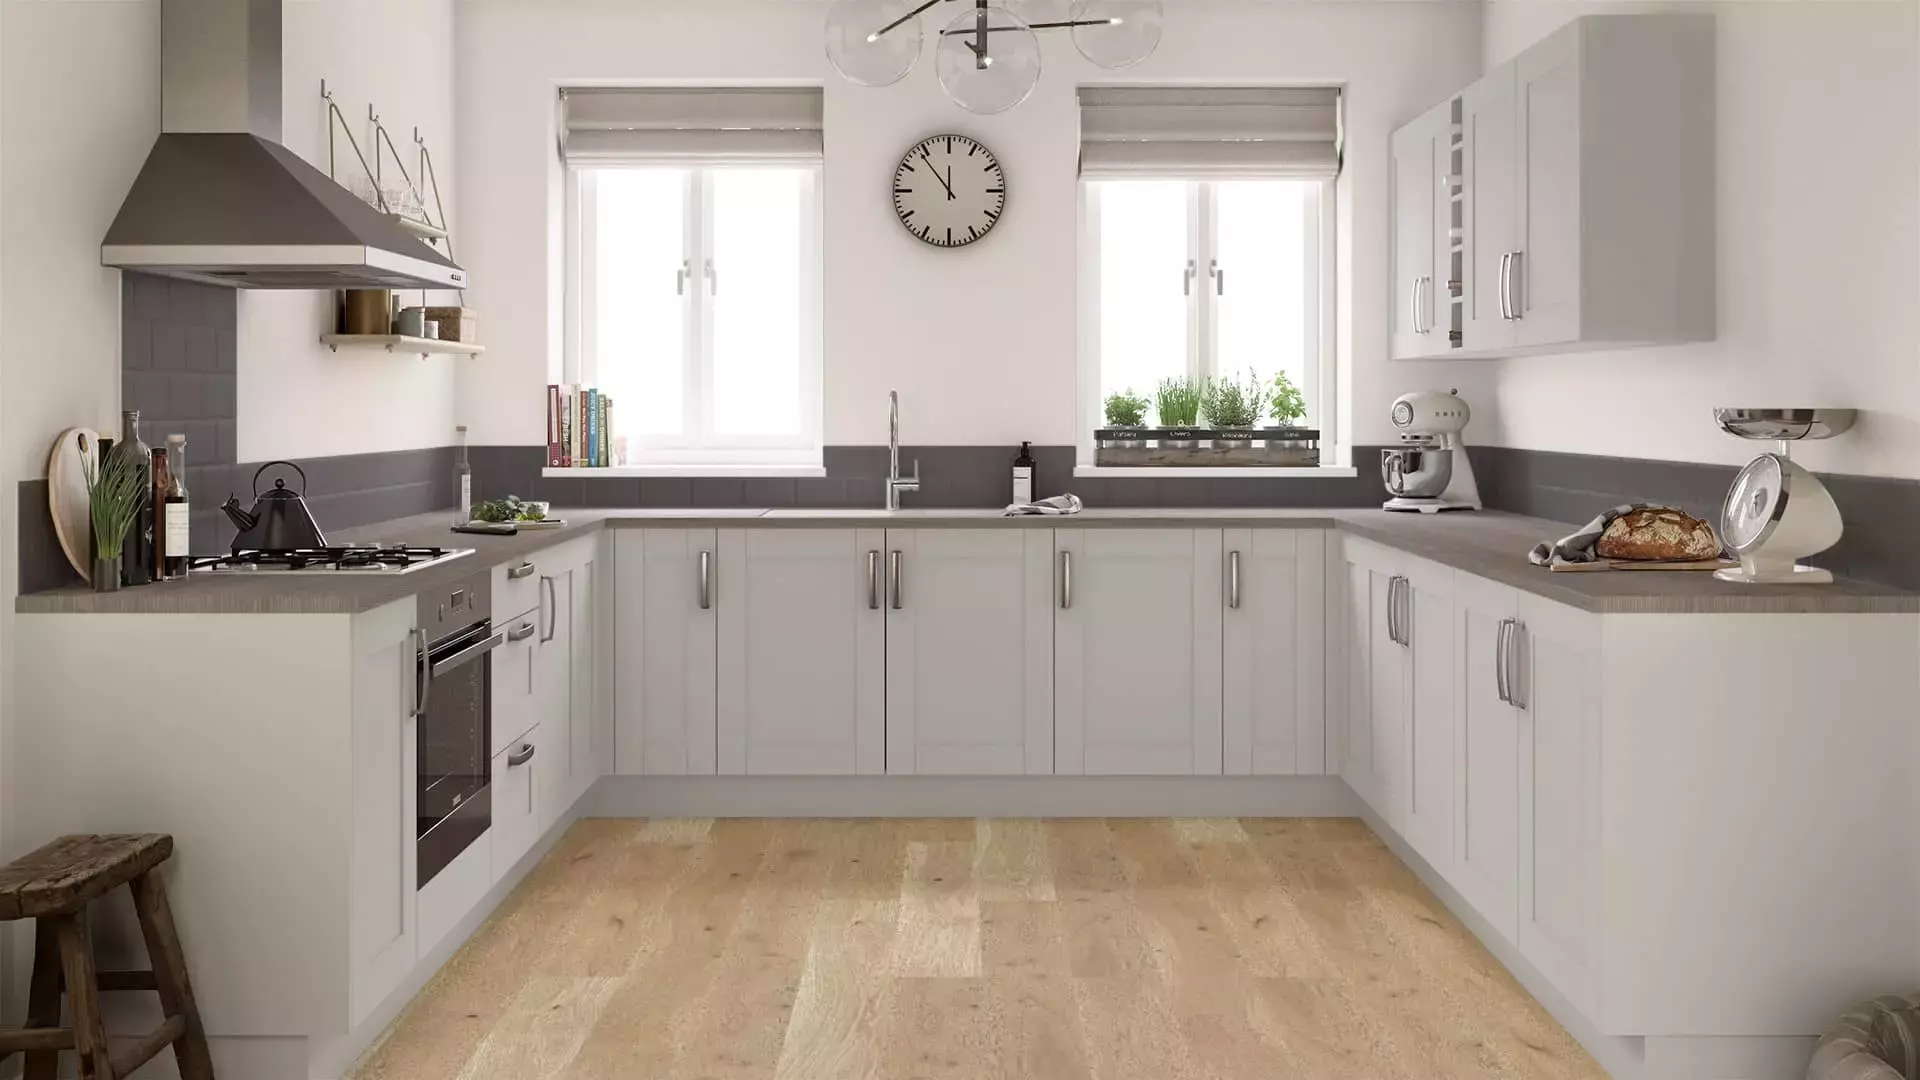 Wickes Fitted Kitchens Review 2024 1706167586.webp